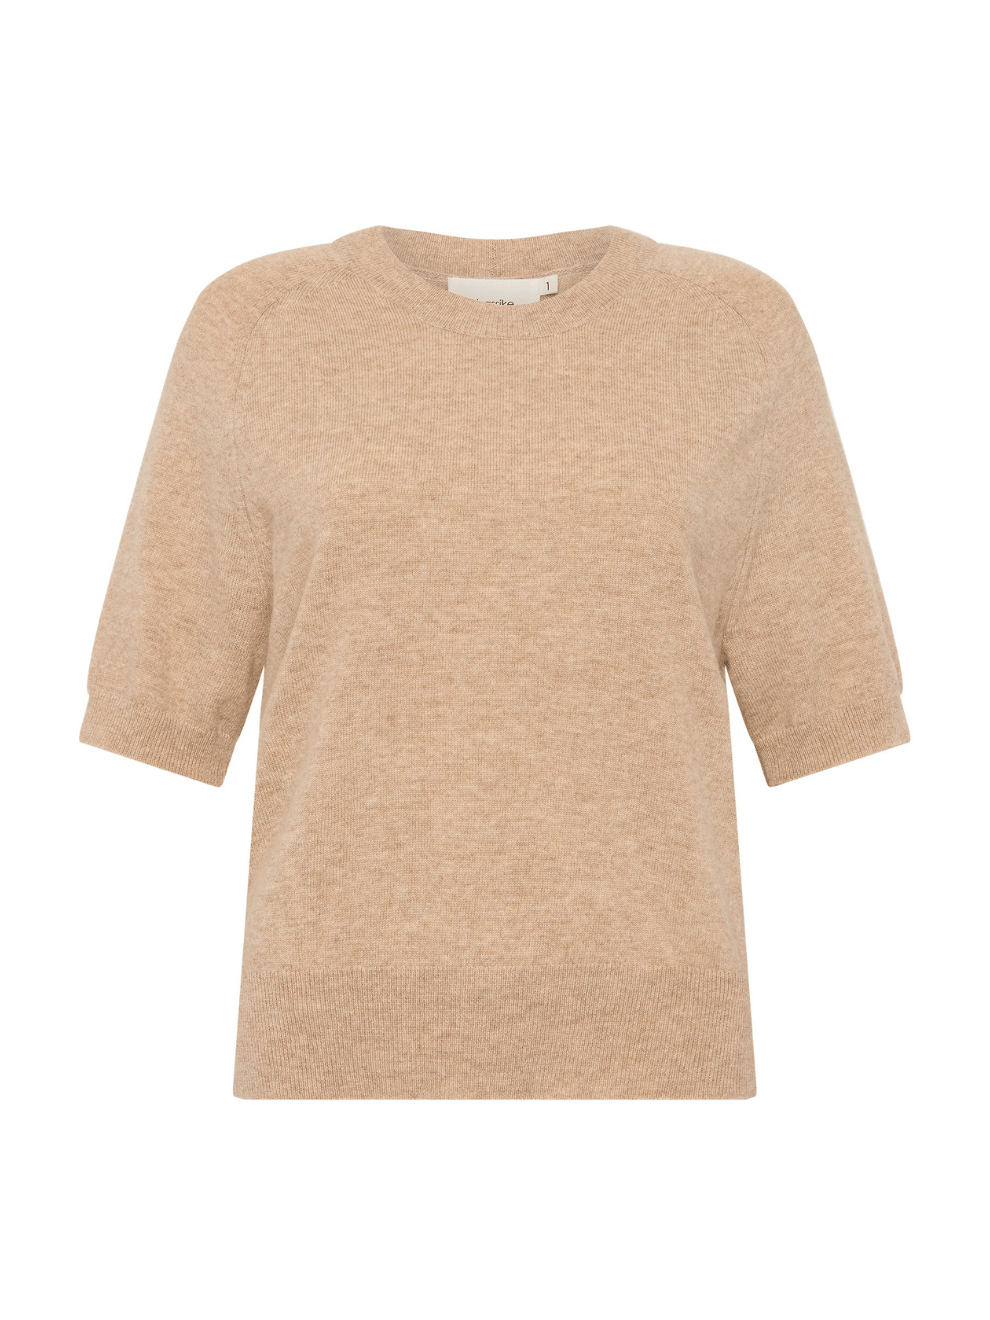 Wool Cashmere T-Shirt Knit in Tan